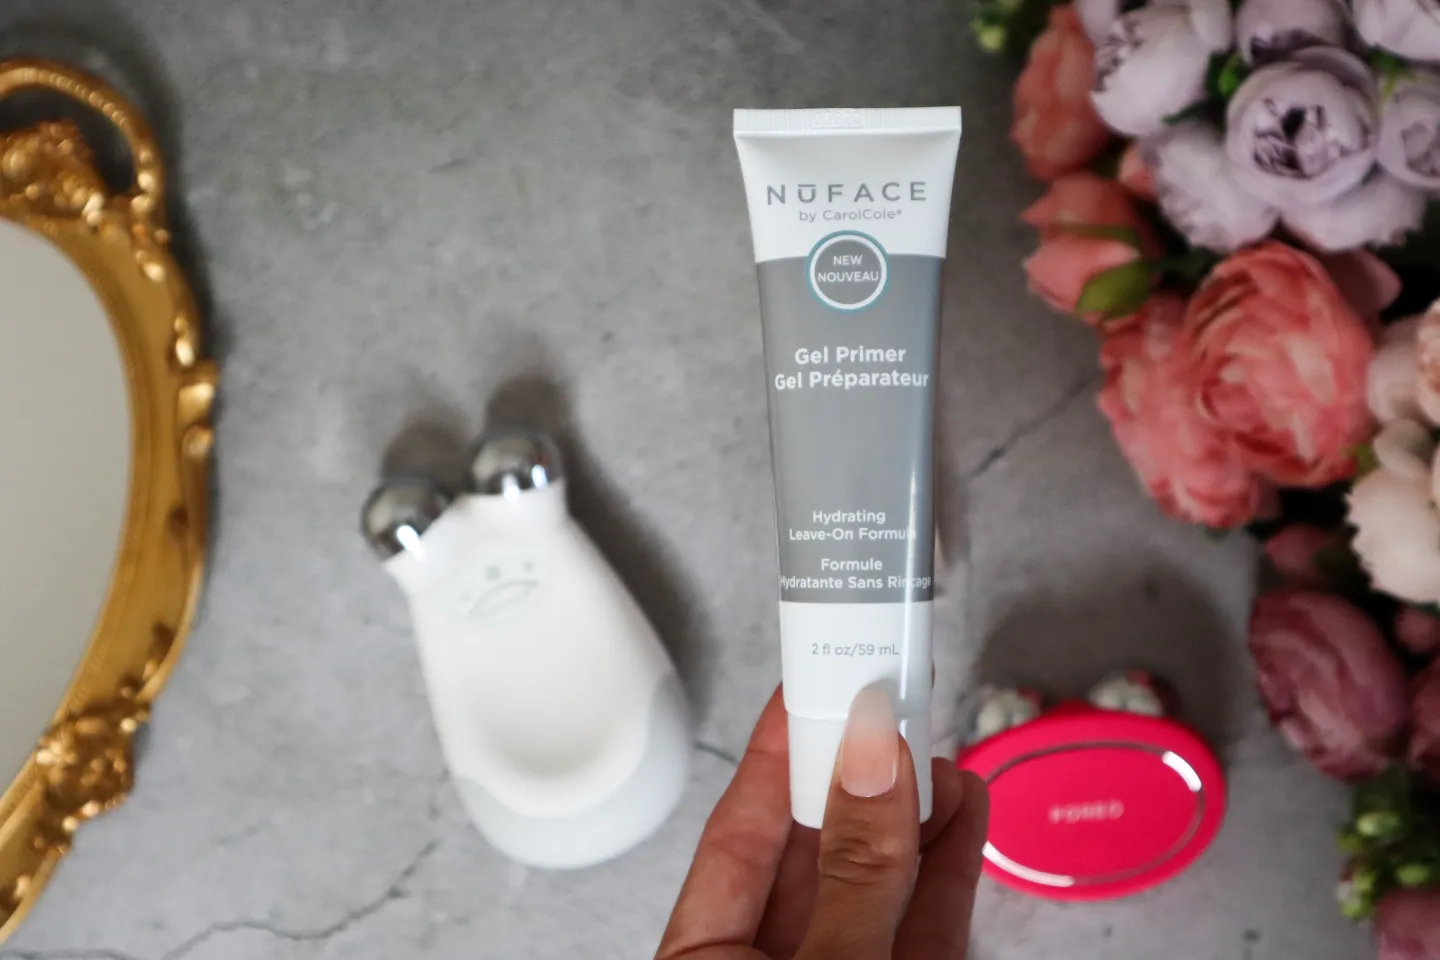 The best Nuface gel substitutes that work just as well